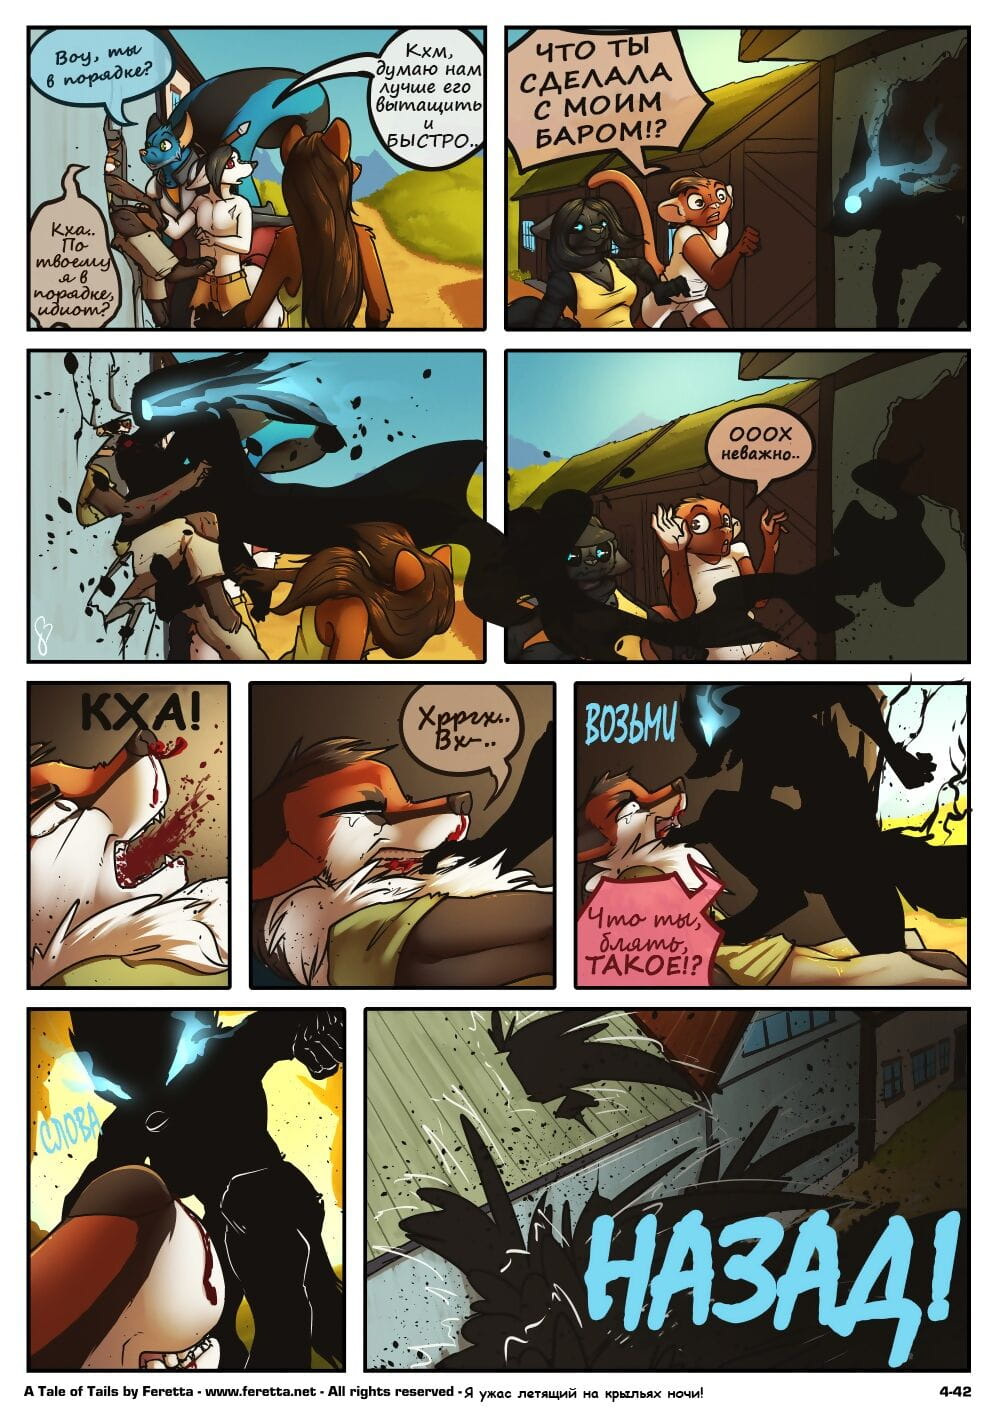 A Tale of Tails: Chapter 4 - Matters of the mind - A Tale of Tails: ????? 4 - ???????? ?????? - part 3 page 1